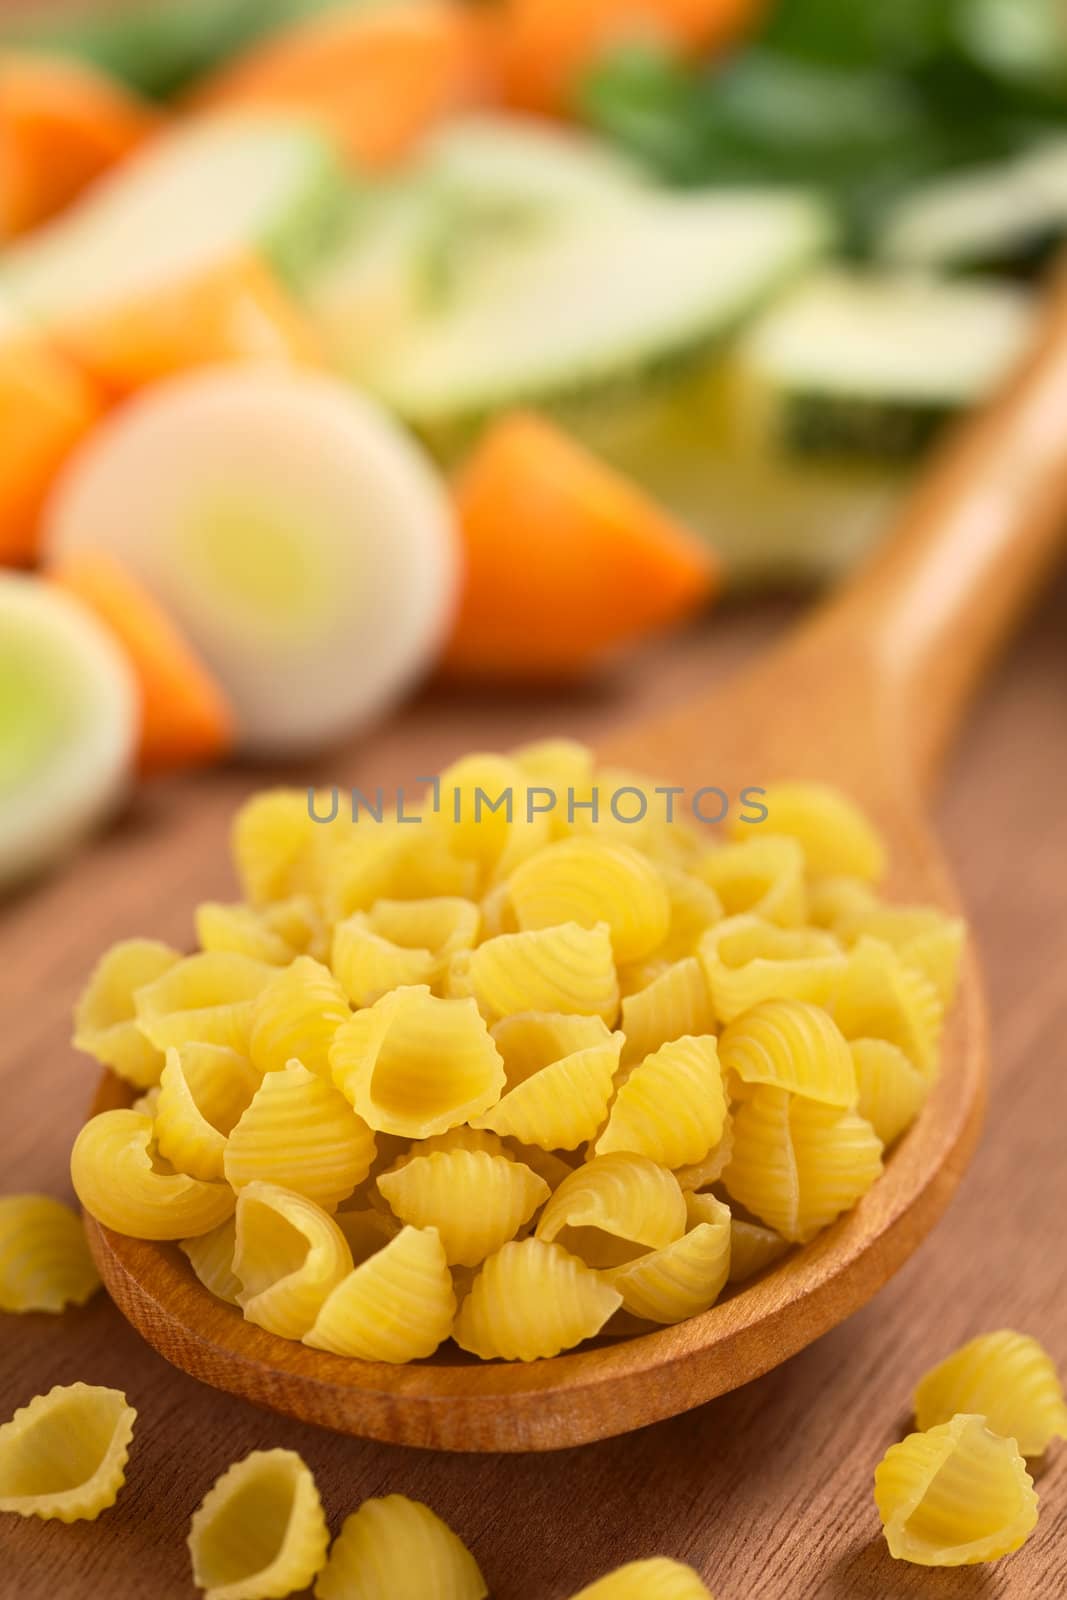 Raw Shell Pasta with Vegetables by ildi